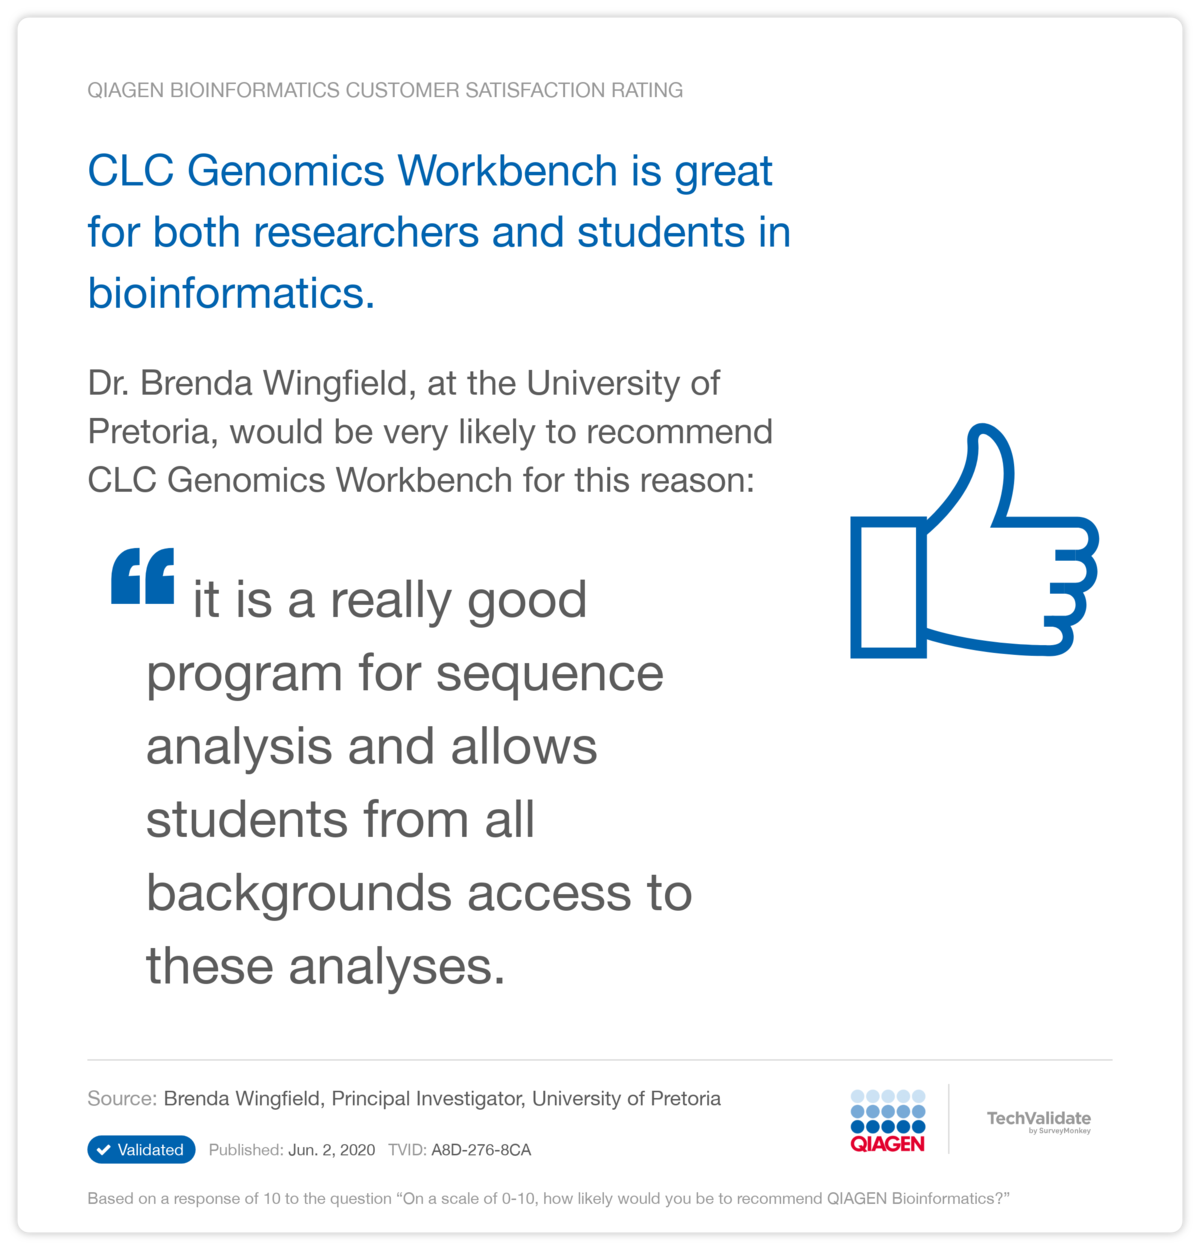 CLC Genomics Workbench is great for both researchers and students in bioinformatics.